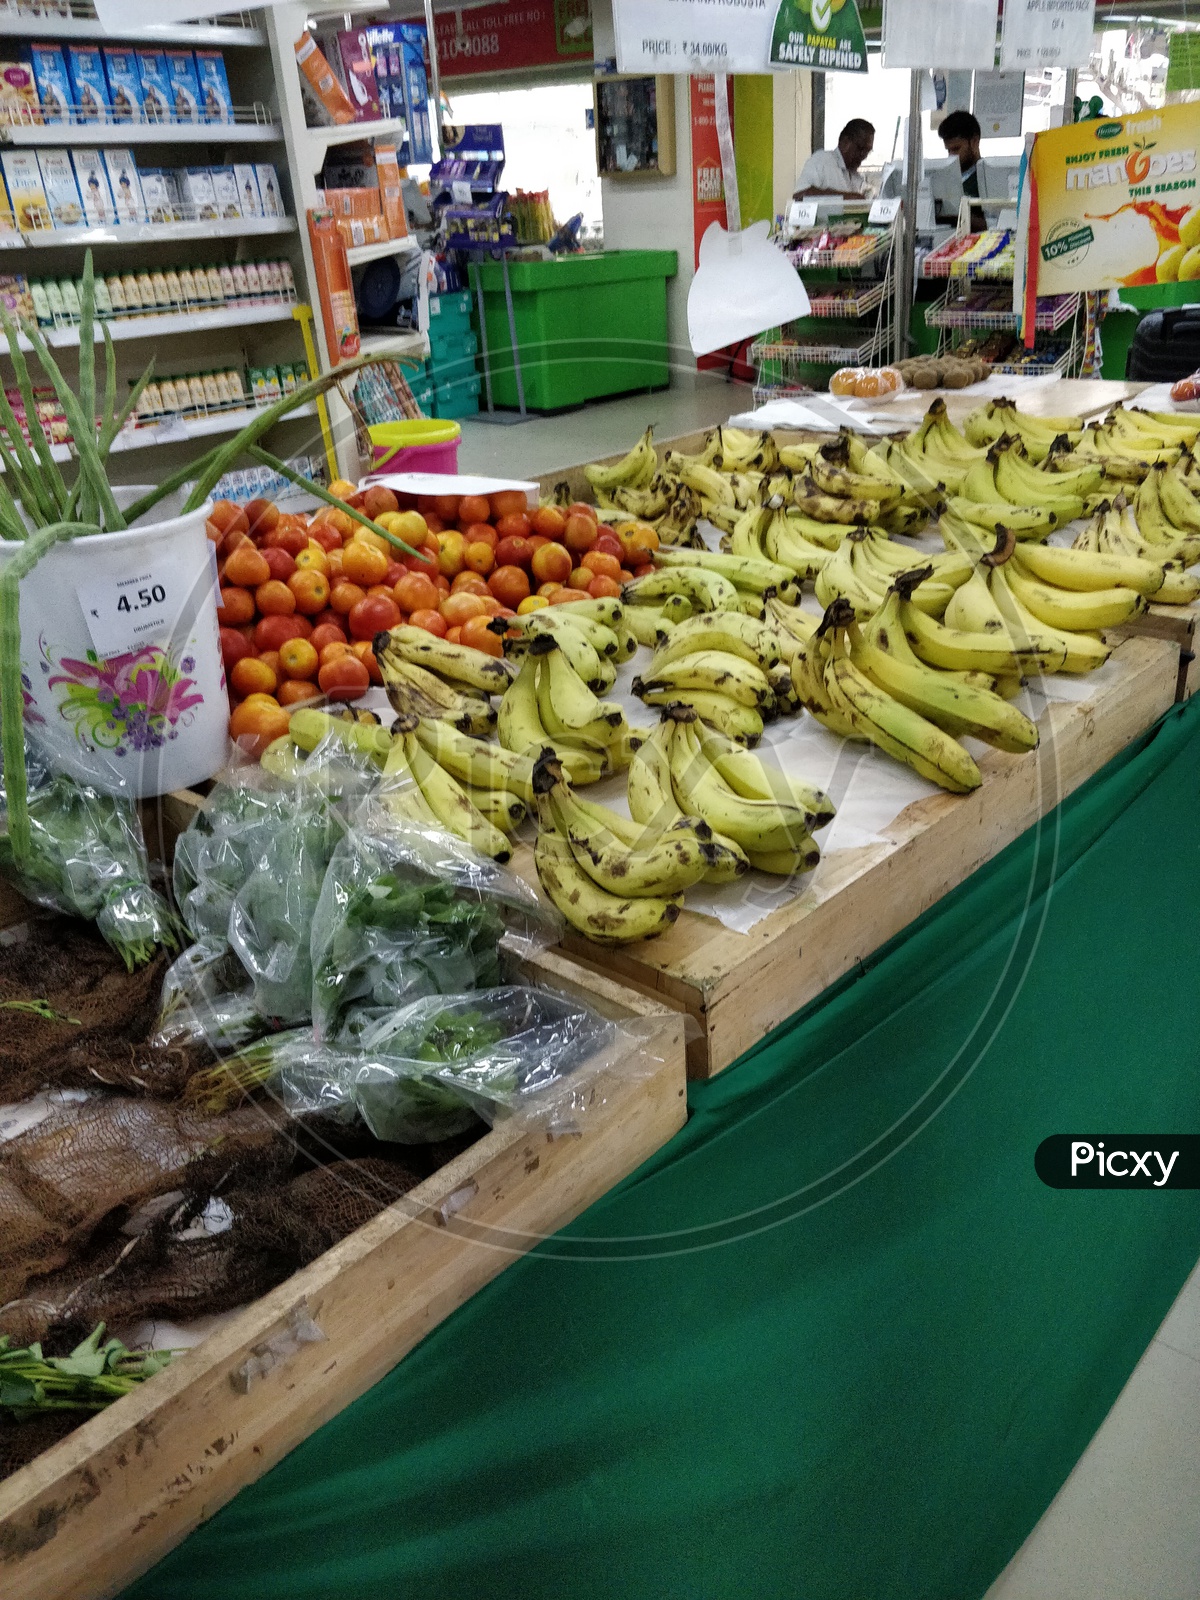 Bananas and fruits in a supermarket